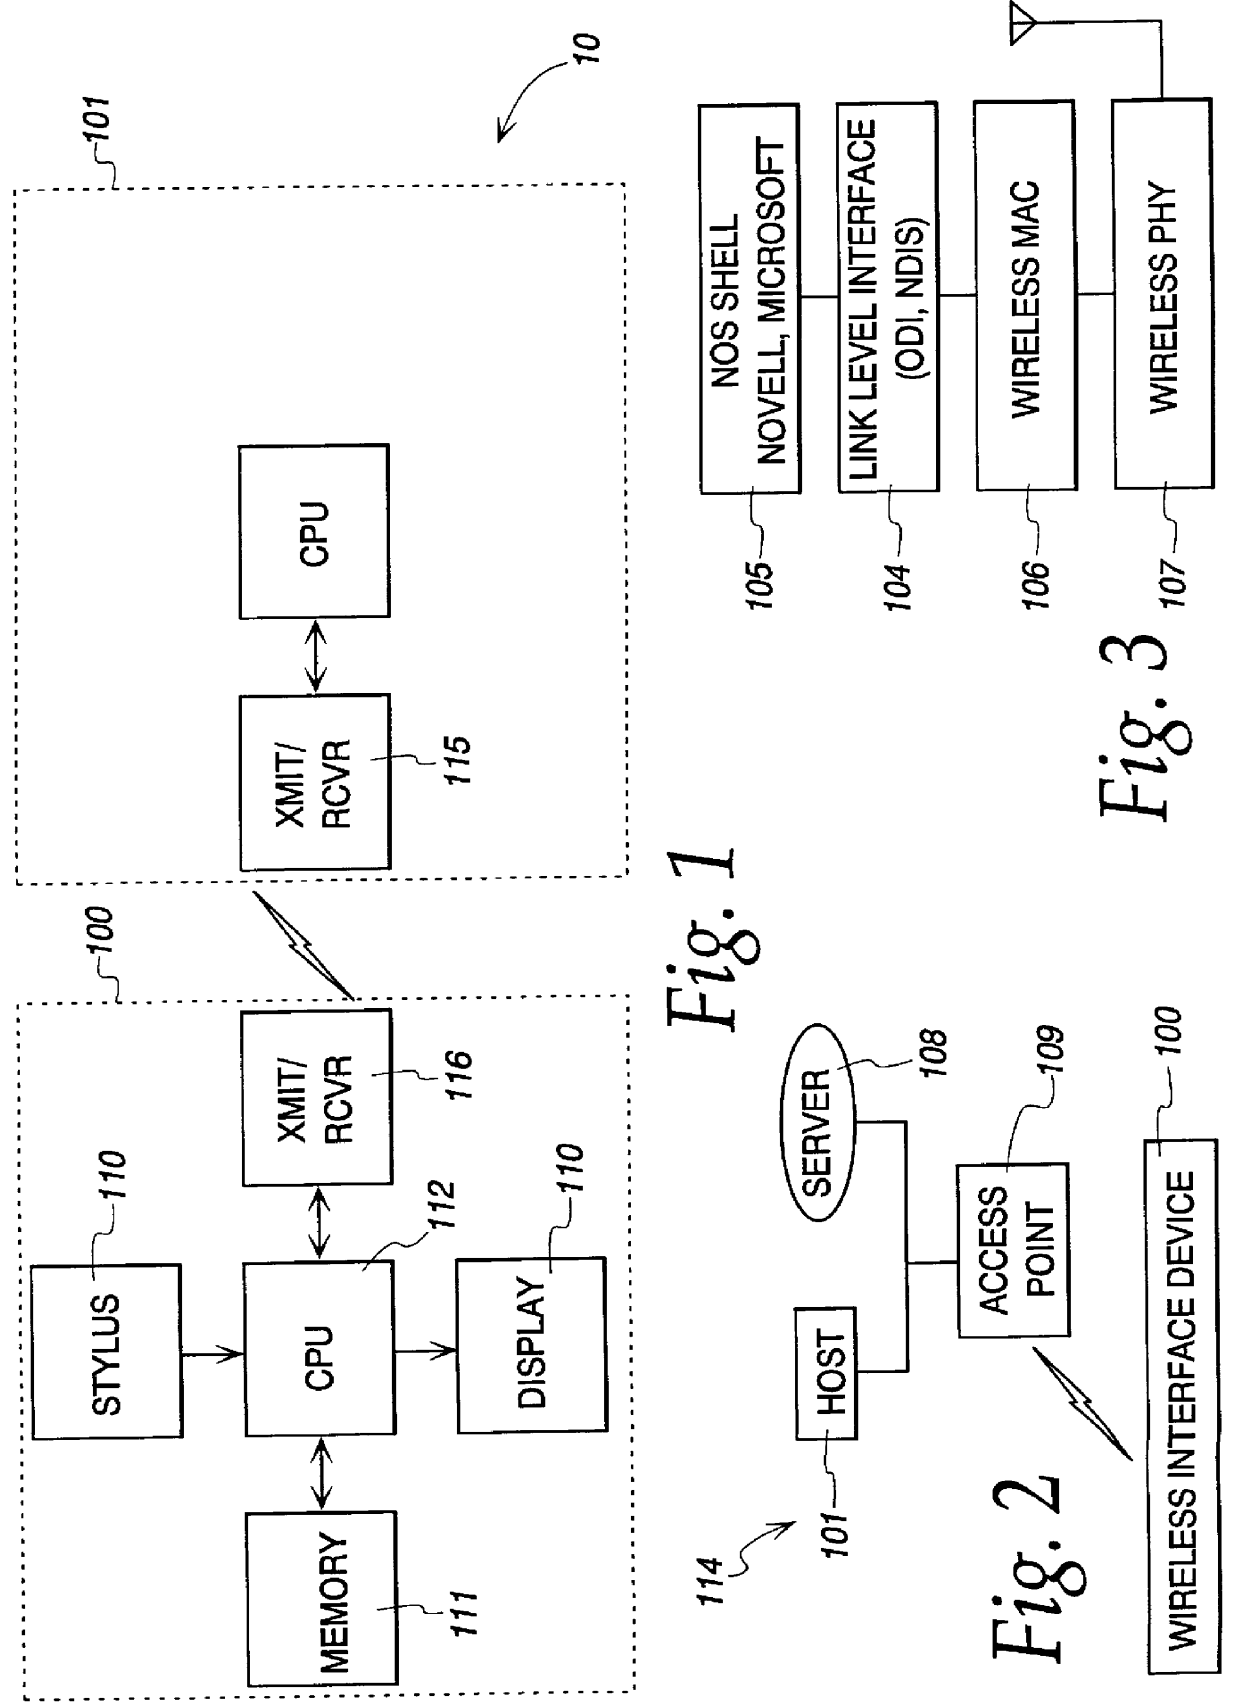 System and method for switching control between a host computer and a remote interface device